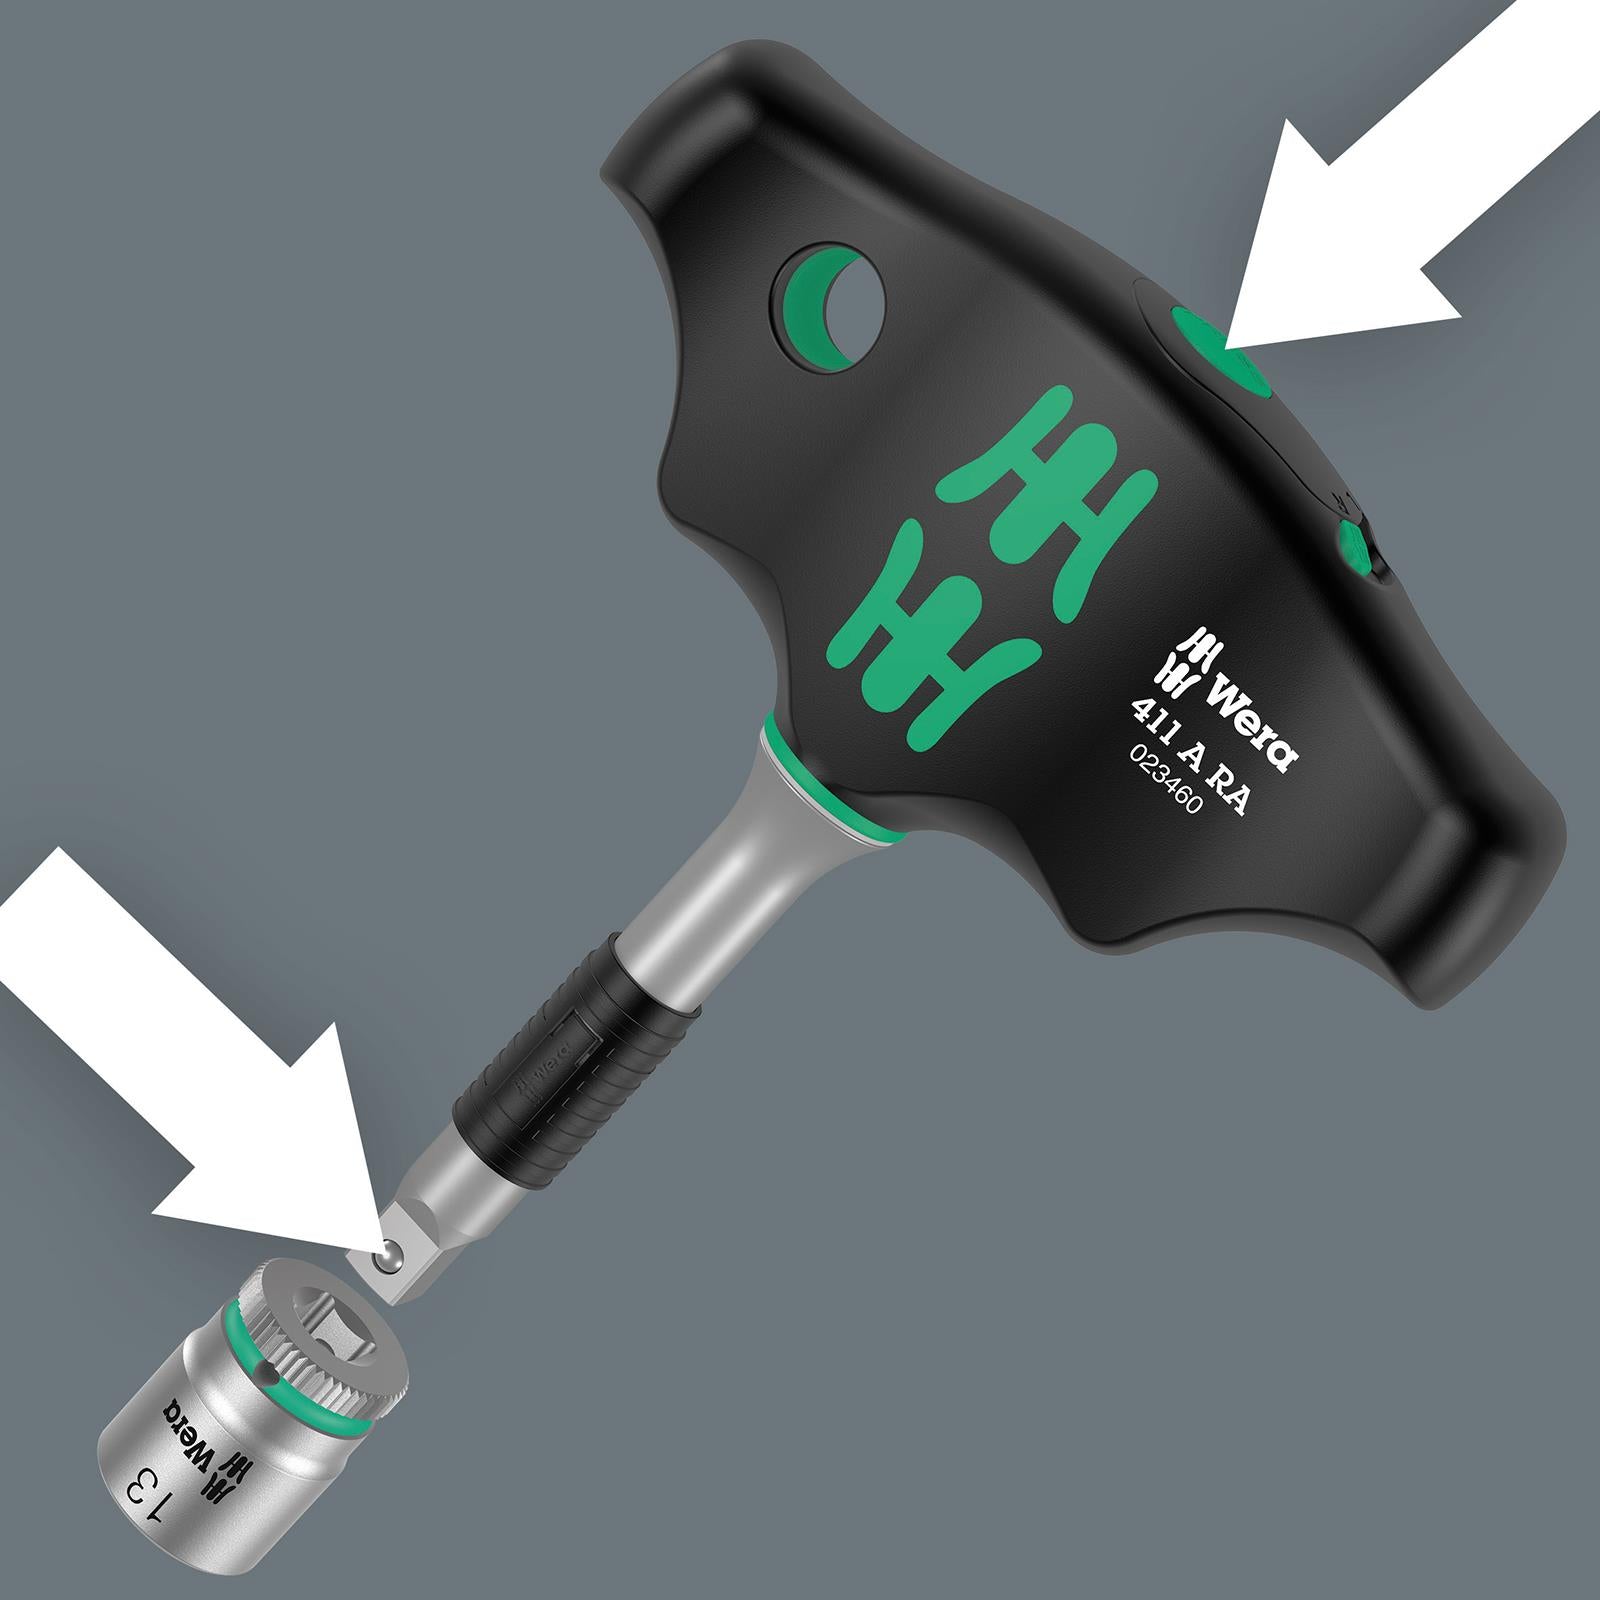 Wera T-Handle Adaptor Screwdriver 1/4" Drive with Ratchet Function 400 RA Imperial Set 2 9 Pieces